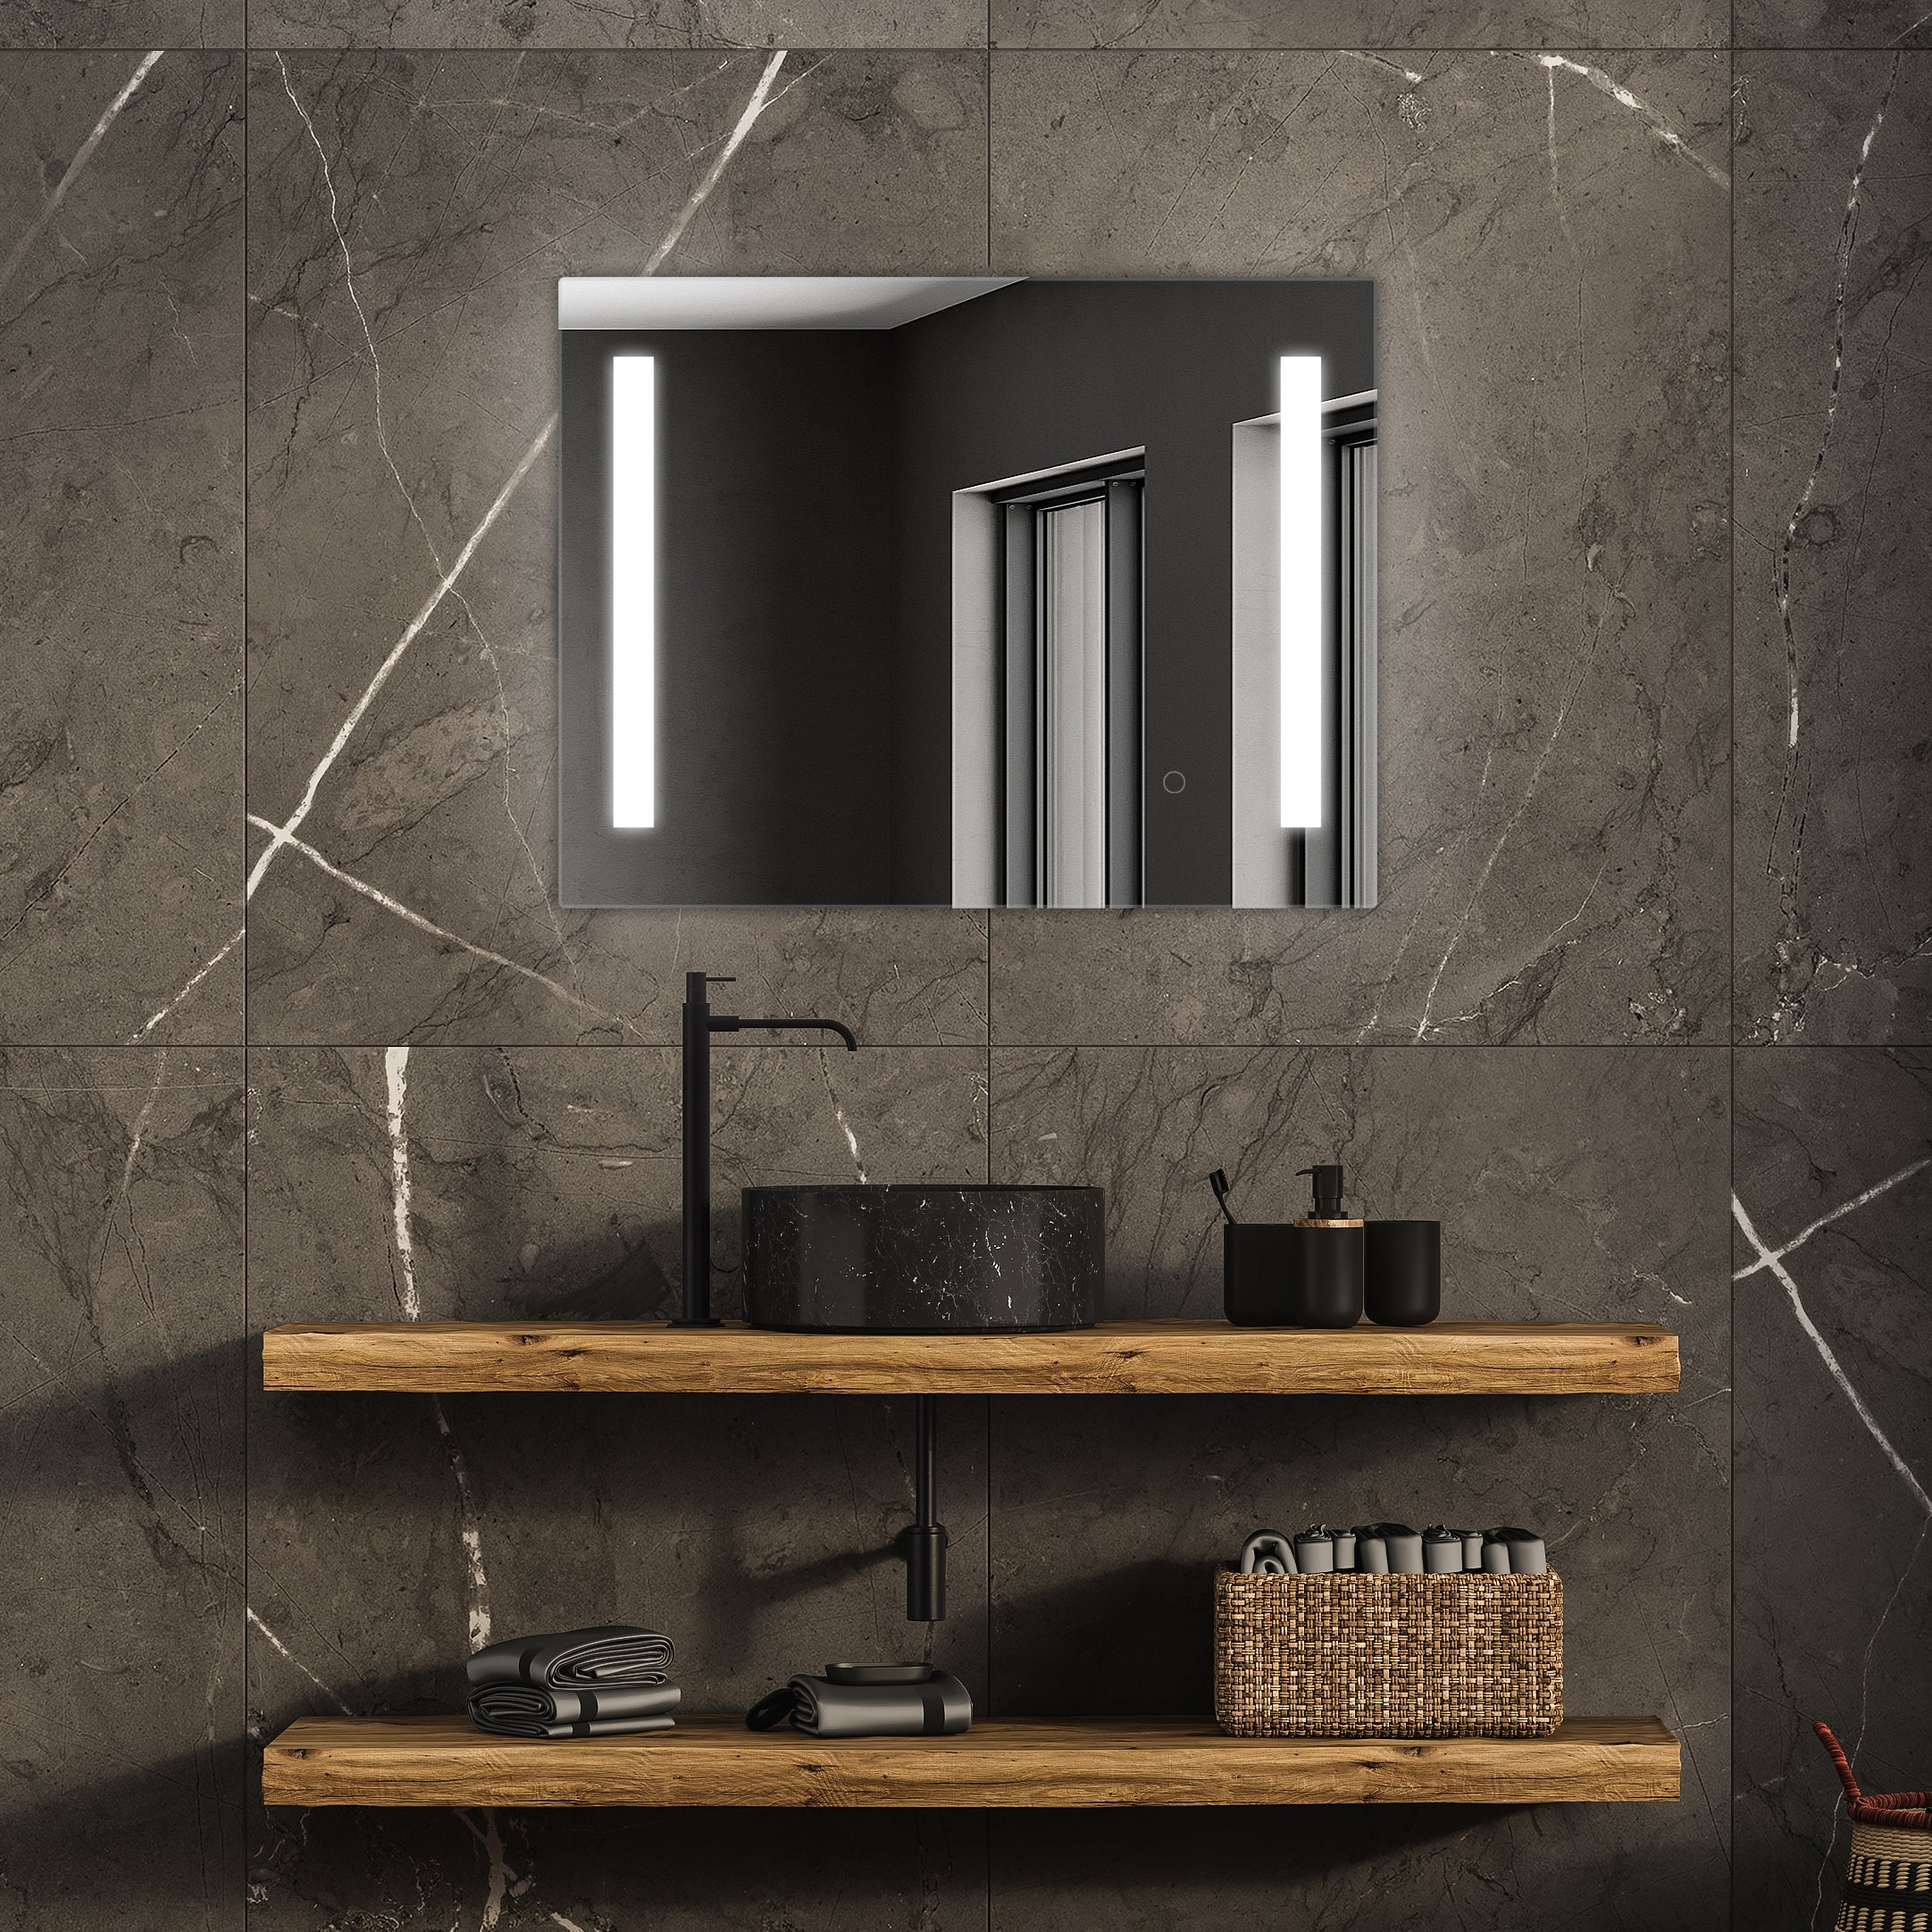 Modern bathroom vanity with the sleek TREVISO LED Mirror, featuring an integrated defogger, above and floating wooden shelves stocked with bathroom essentials, set against a textured dark marble wall.